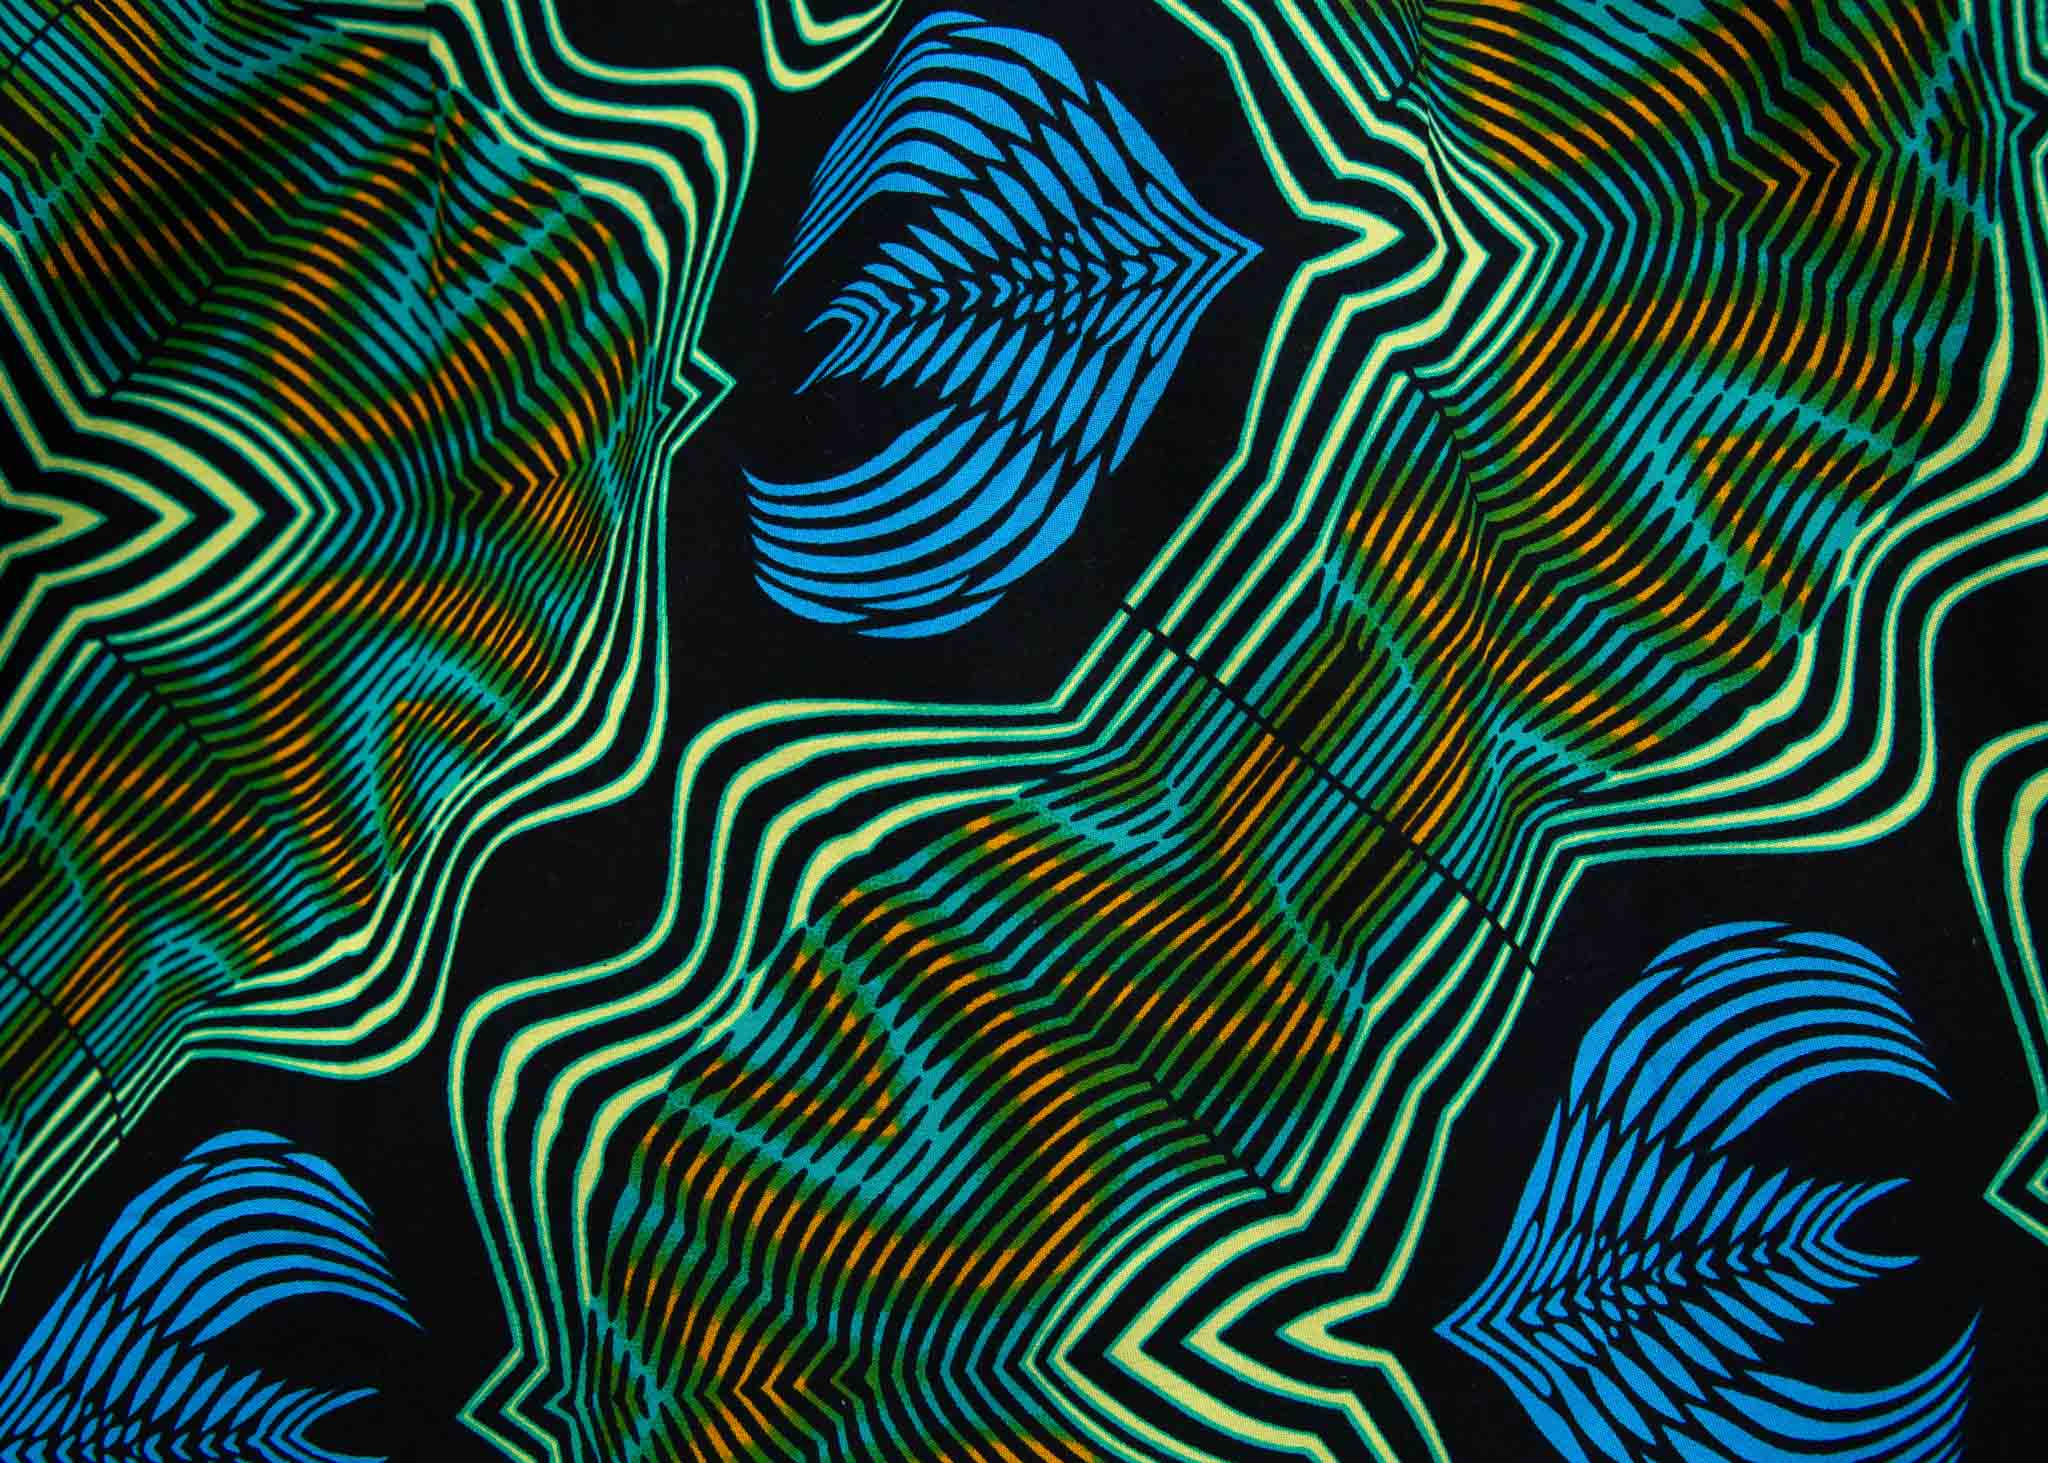 Display of long sleeve blouse with blue and green abstract vibration print.